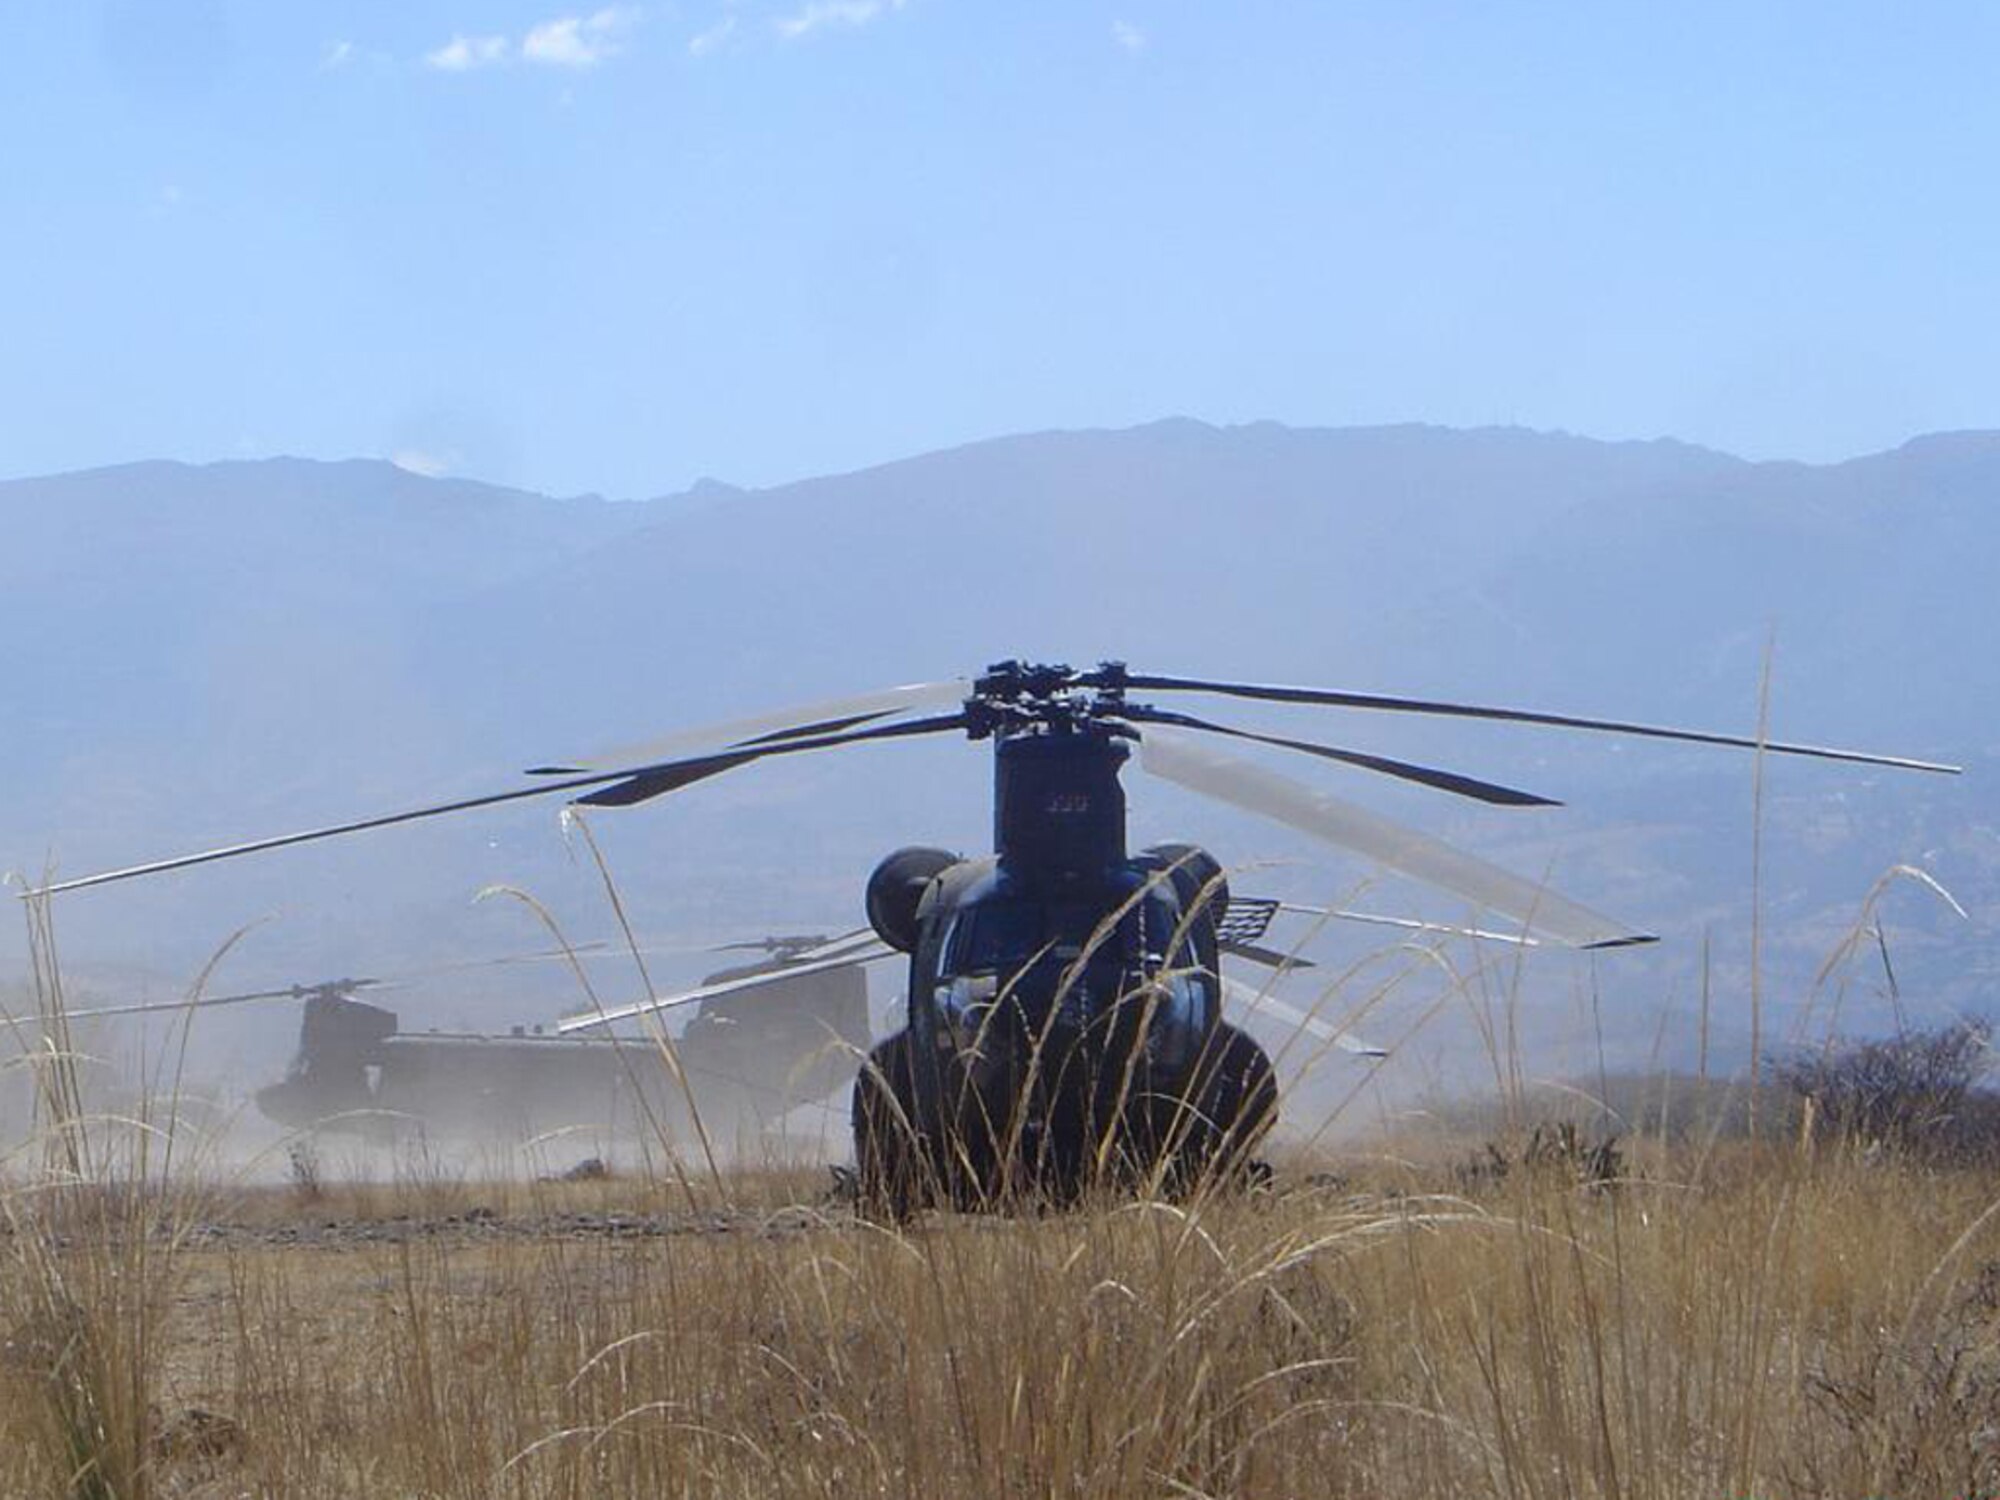 A CH-47 Chinook, currently assigned to New Horizons Peru-2008, sits in the air field of Los Cabitos, Peru, June 7. (U.S. Army photo/Capt. Derrick Llewellyn)